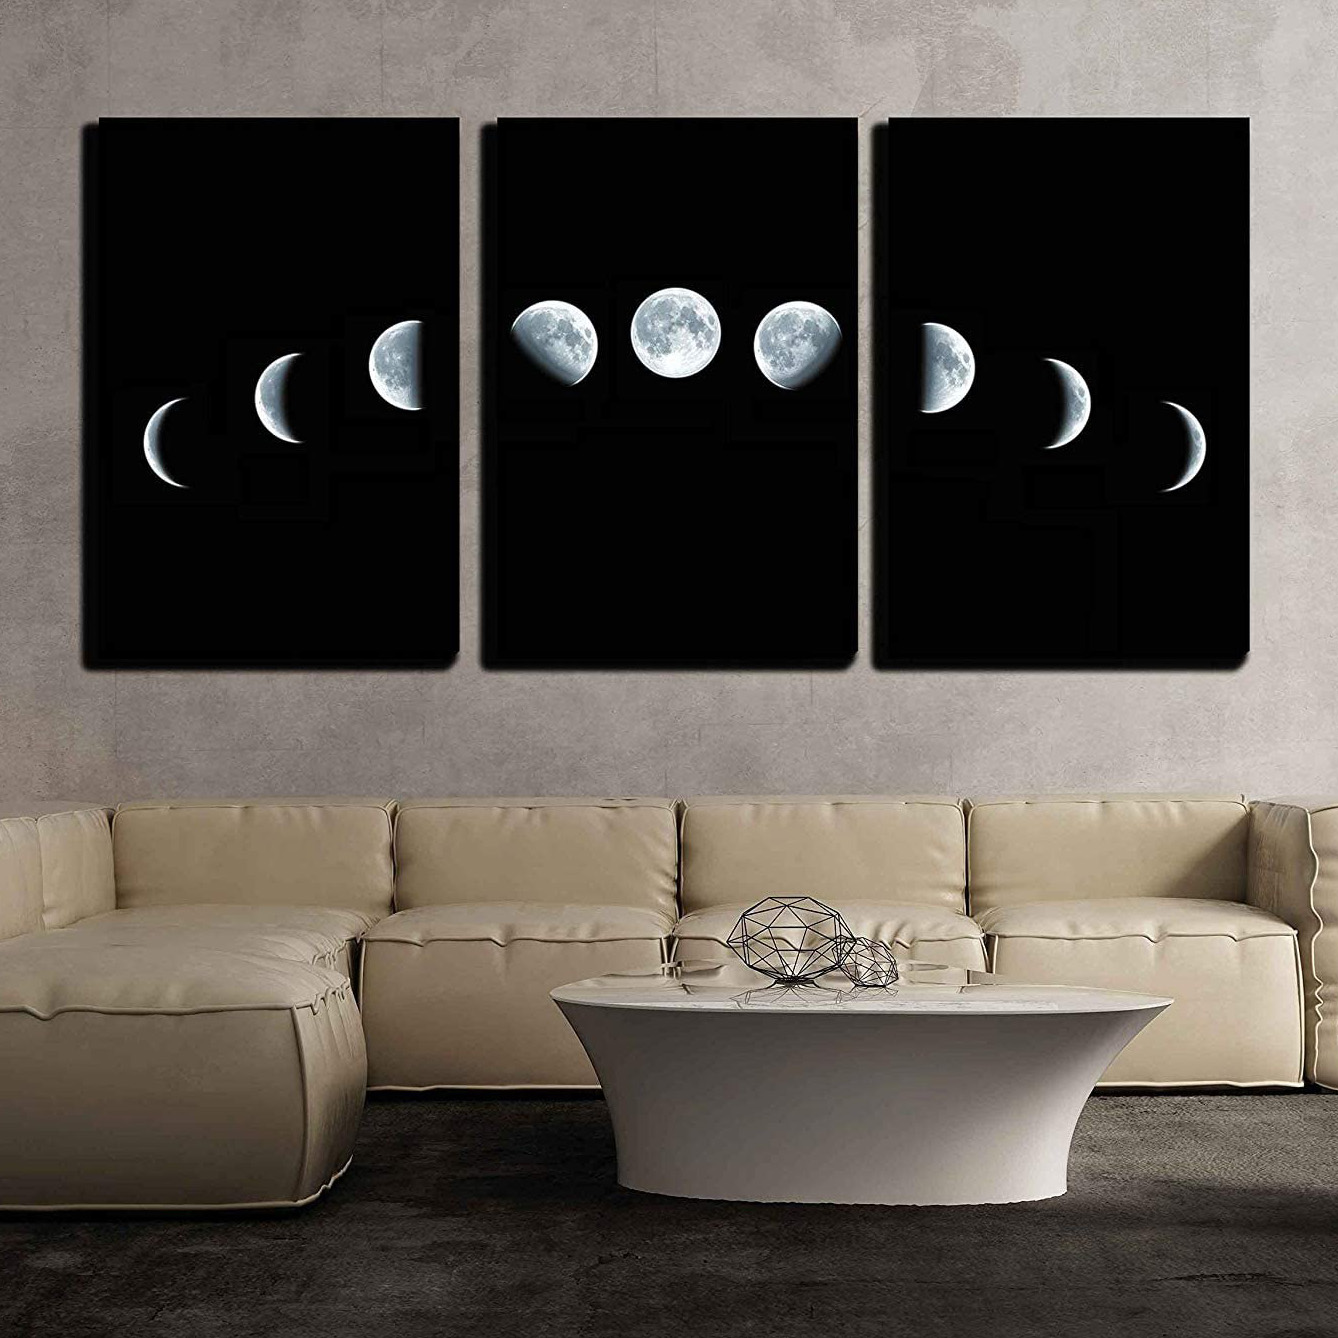 the phases of the woon on a canvas